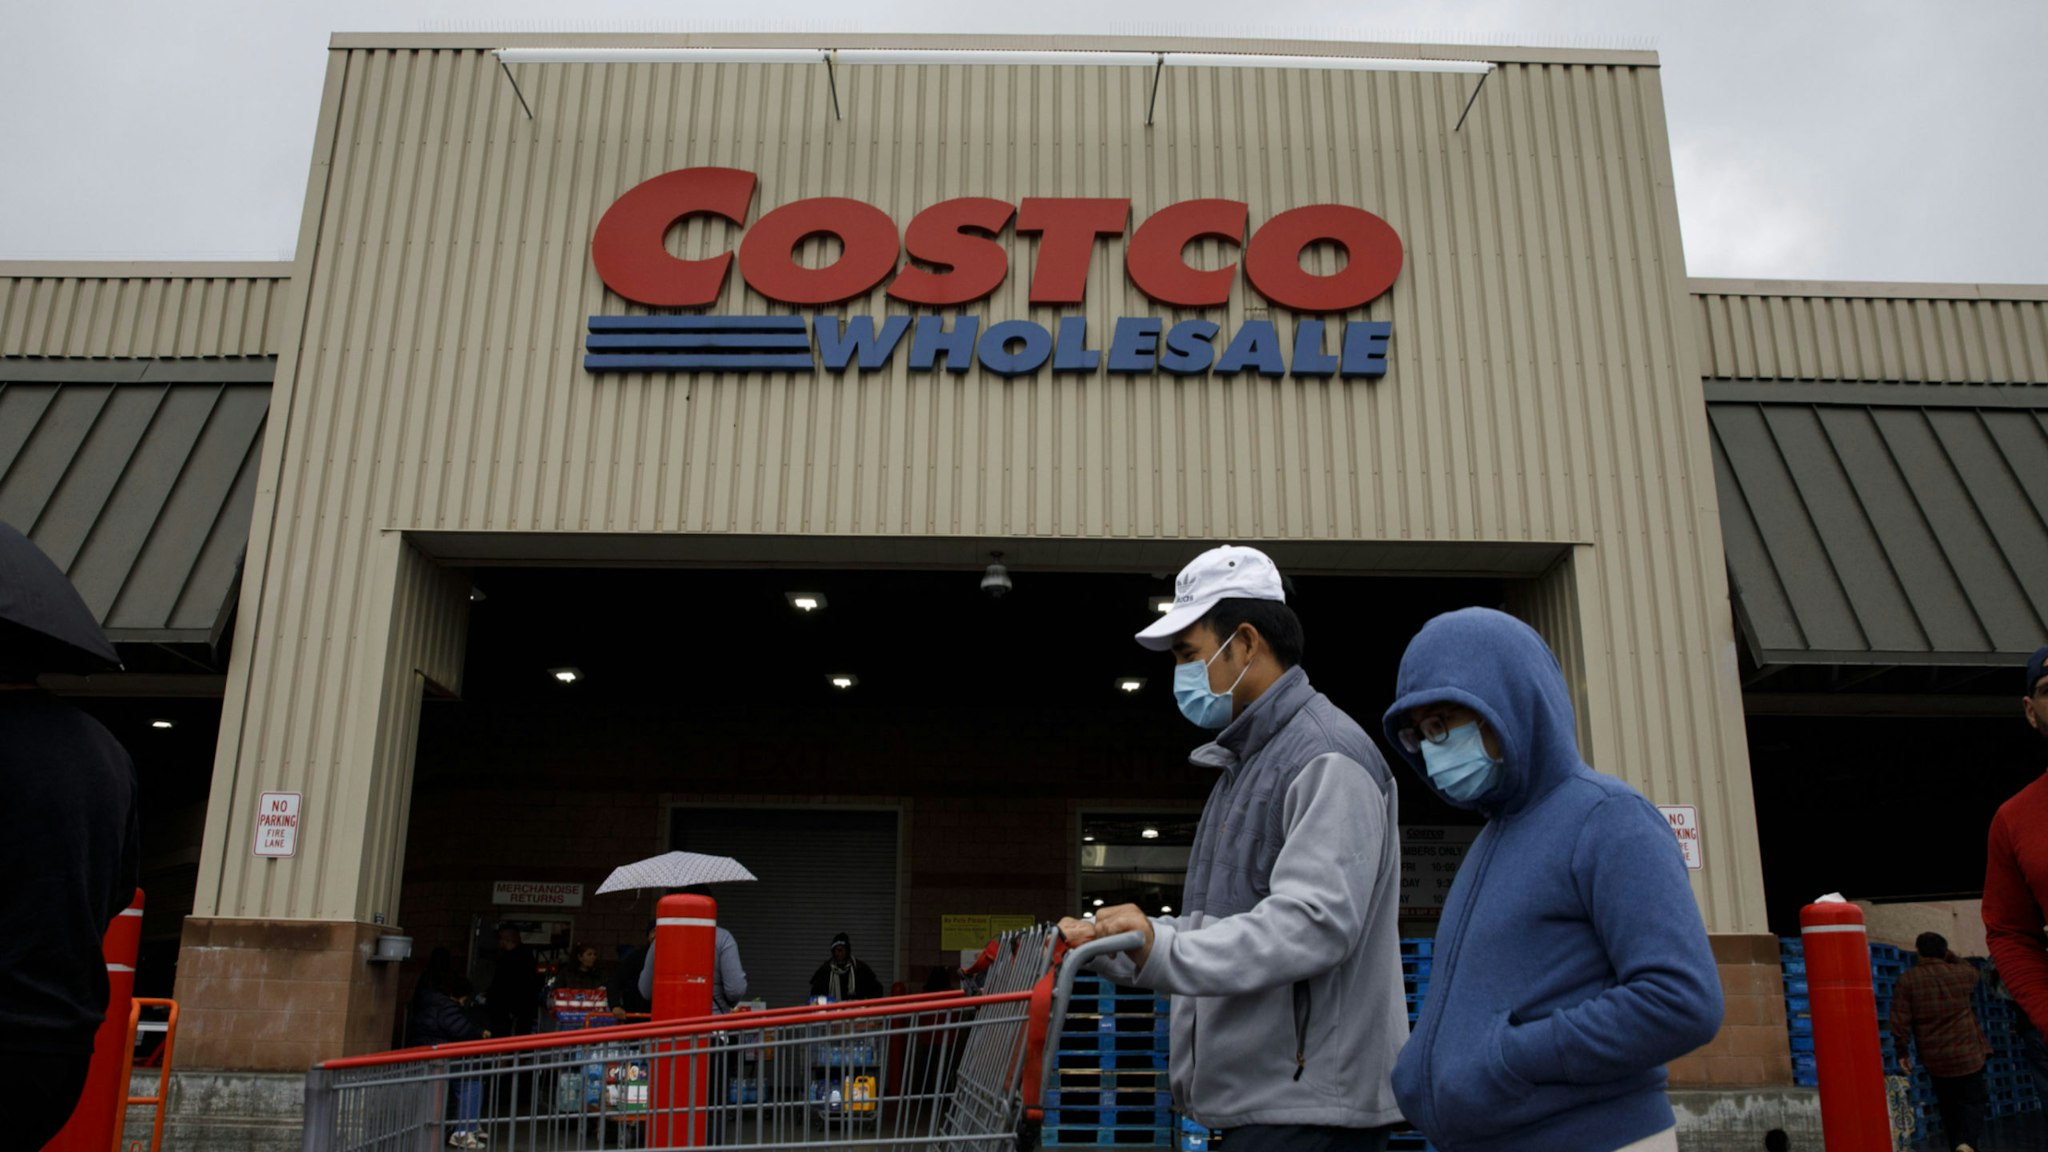 Shoppers wear protective masks while waiting in line to enter a Costco Wholesale Corp. location in Hawthorne, California, U.S., on Saturday, March 14, 2020.